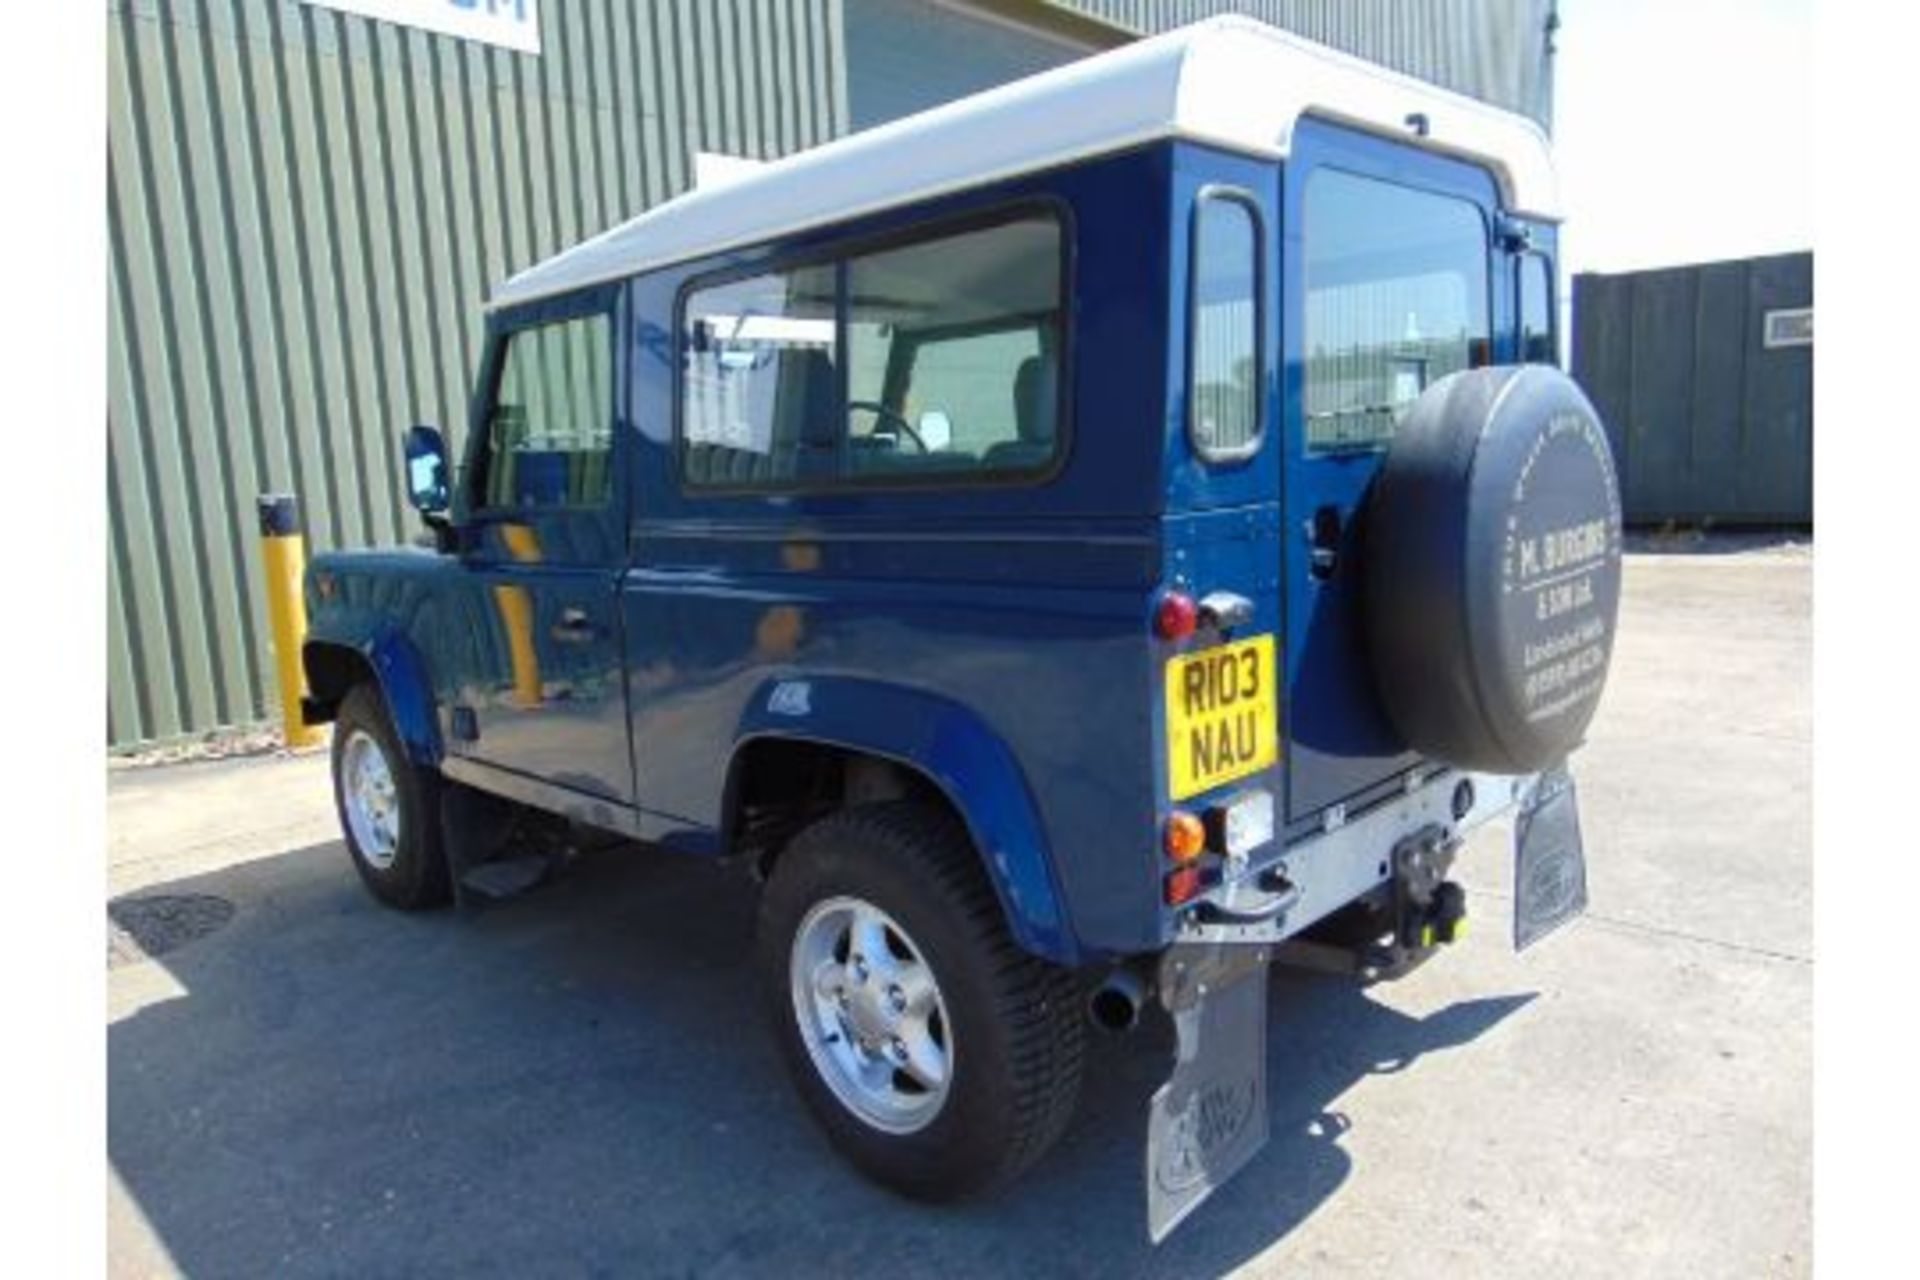 1998 Land Rover Defender 90 300TDi ONLY 76,319 MILES! RECENT PROFESSIONAL TOP TO BOTTOM REBUILD! - Image 9 of 55